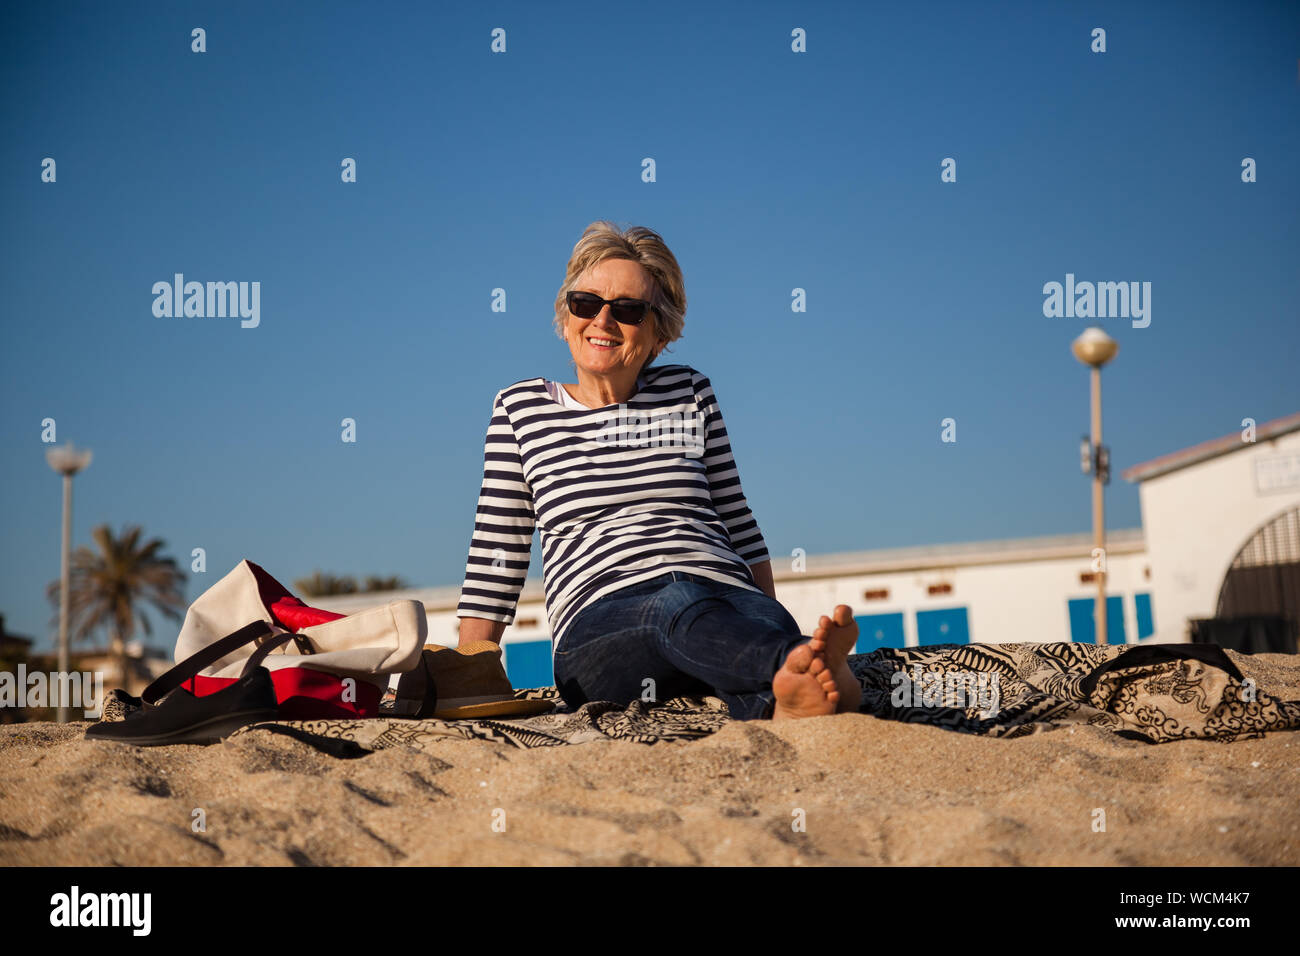 Modern elderly lady with striped t-shirt enjoying sun and beach with big blue sky in the background Stock Photo